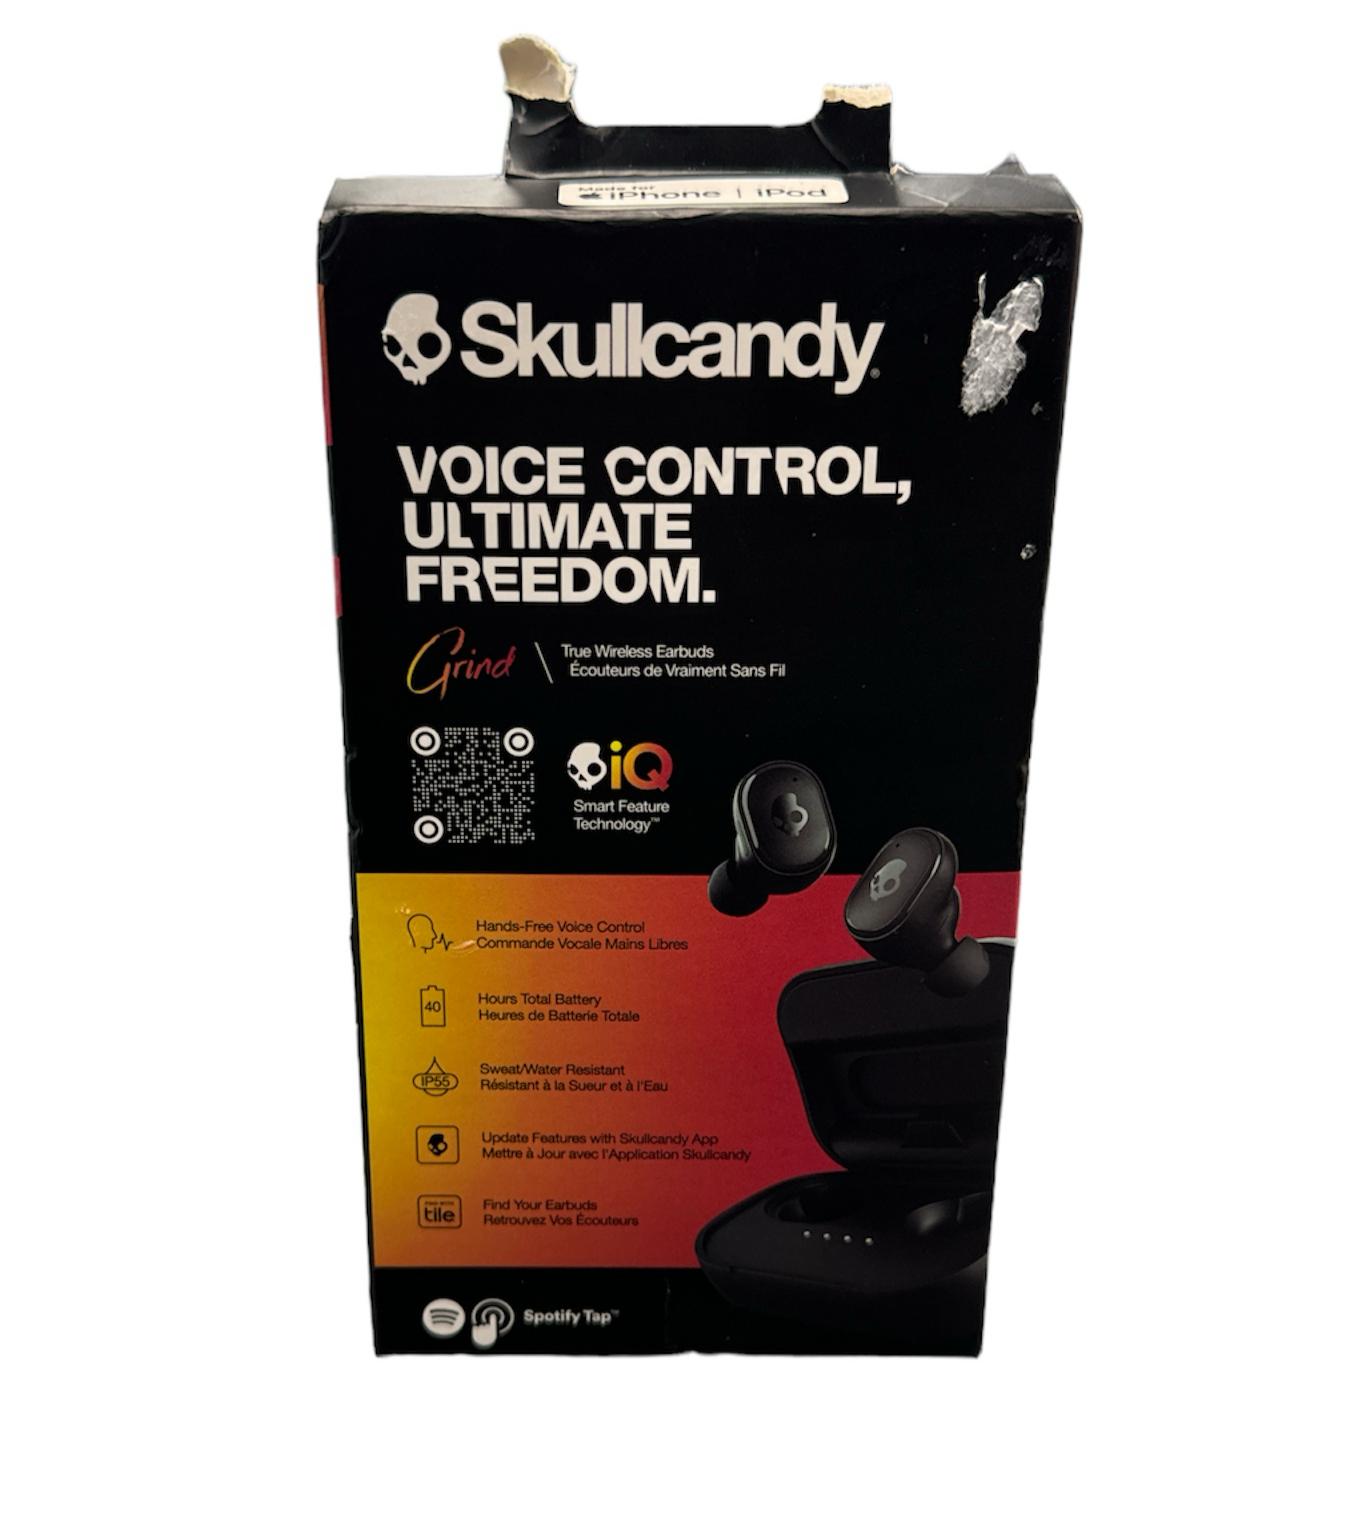 Skullcandy Voice Control Wireless Earbuds Boxed